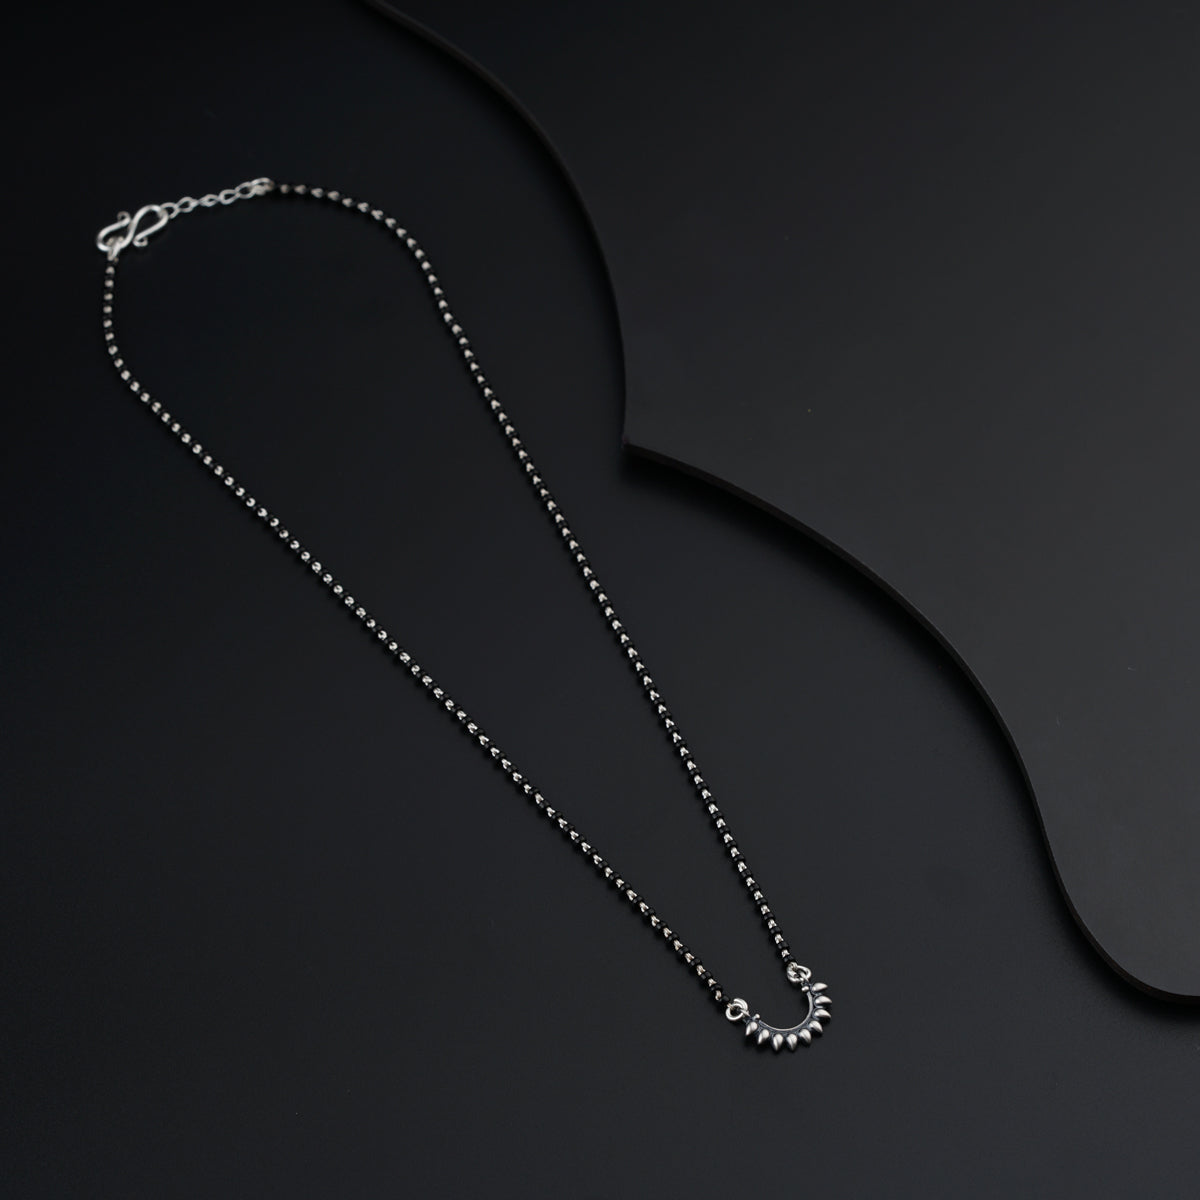 a necklace with a heart on it on a black surface